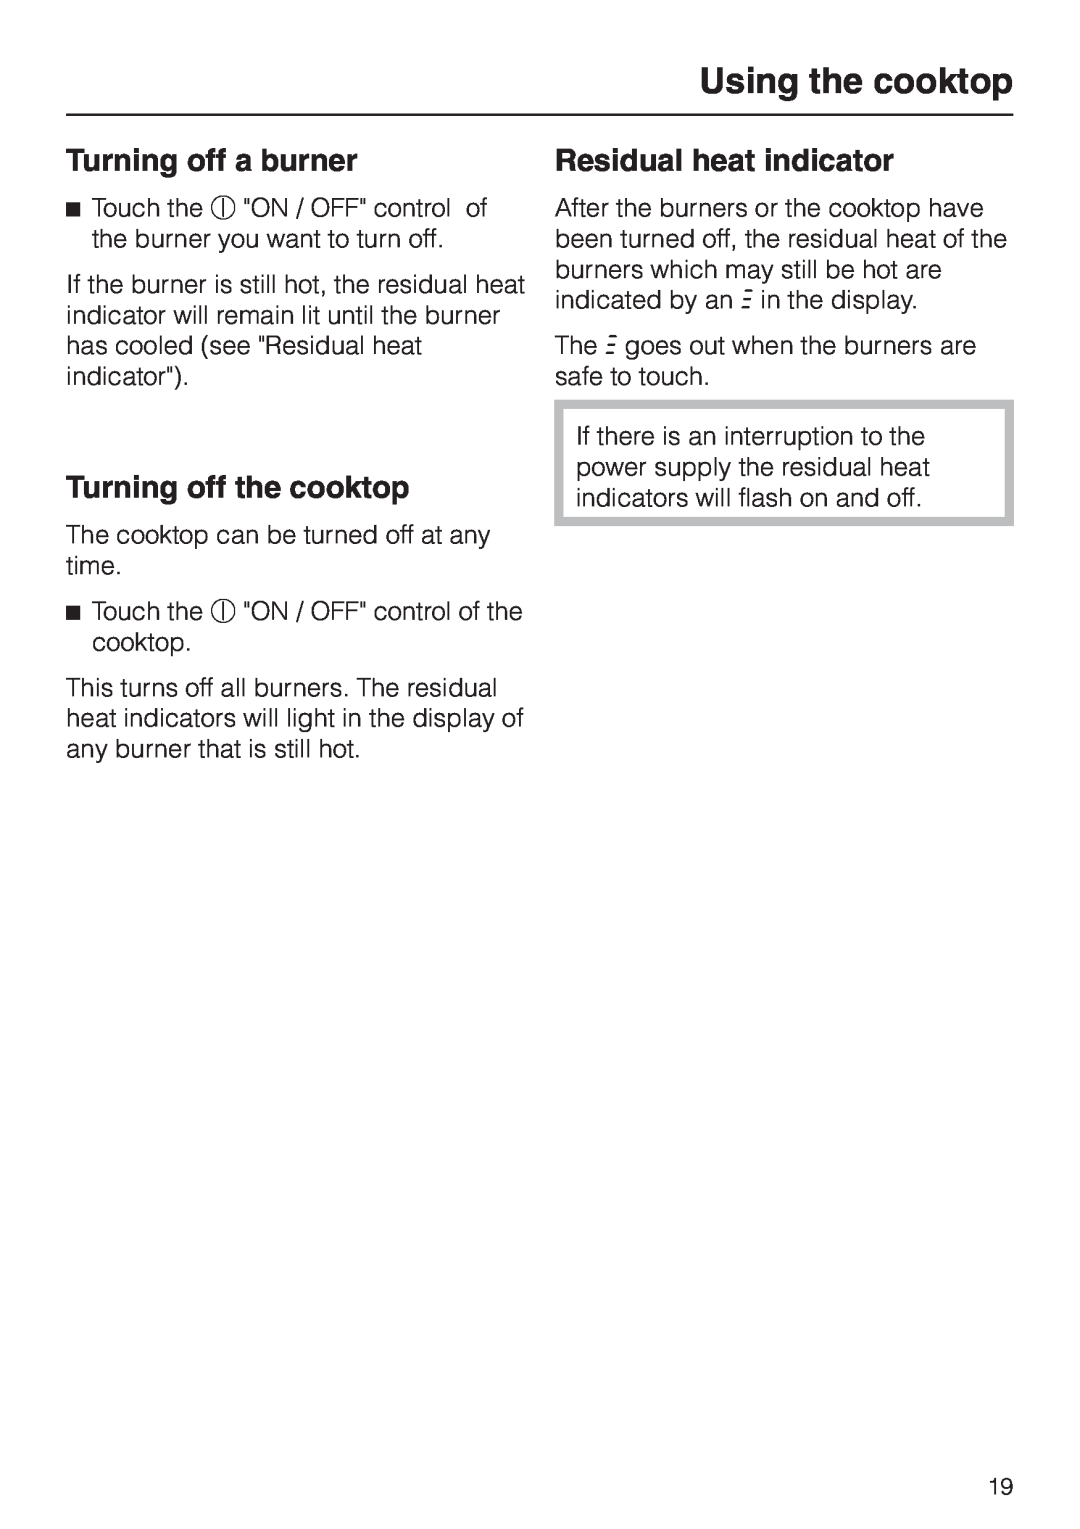 Miele KM 452 manual Turning off a burner, Turning off the cooktop, Residual heat indicator, Using the cooktop 